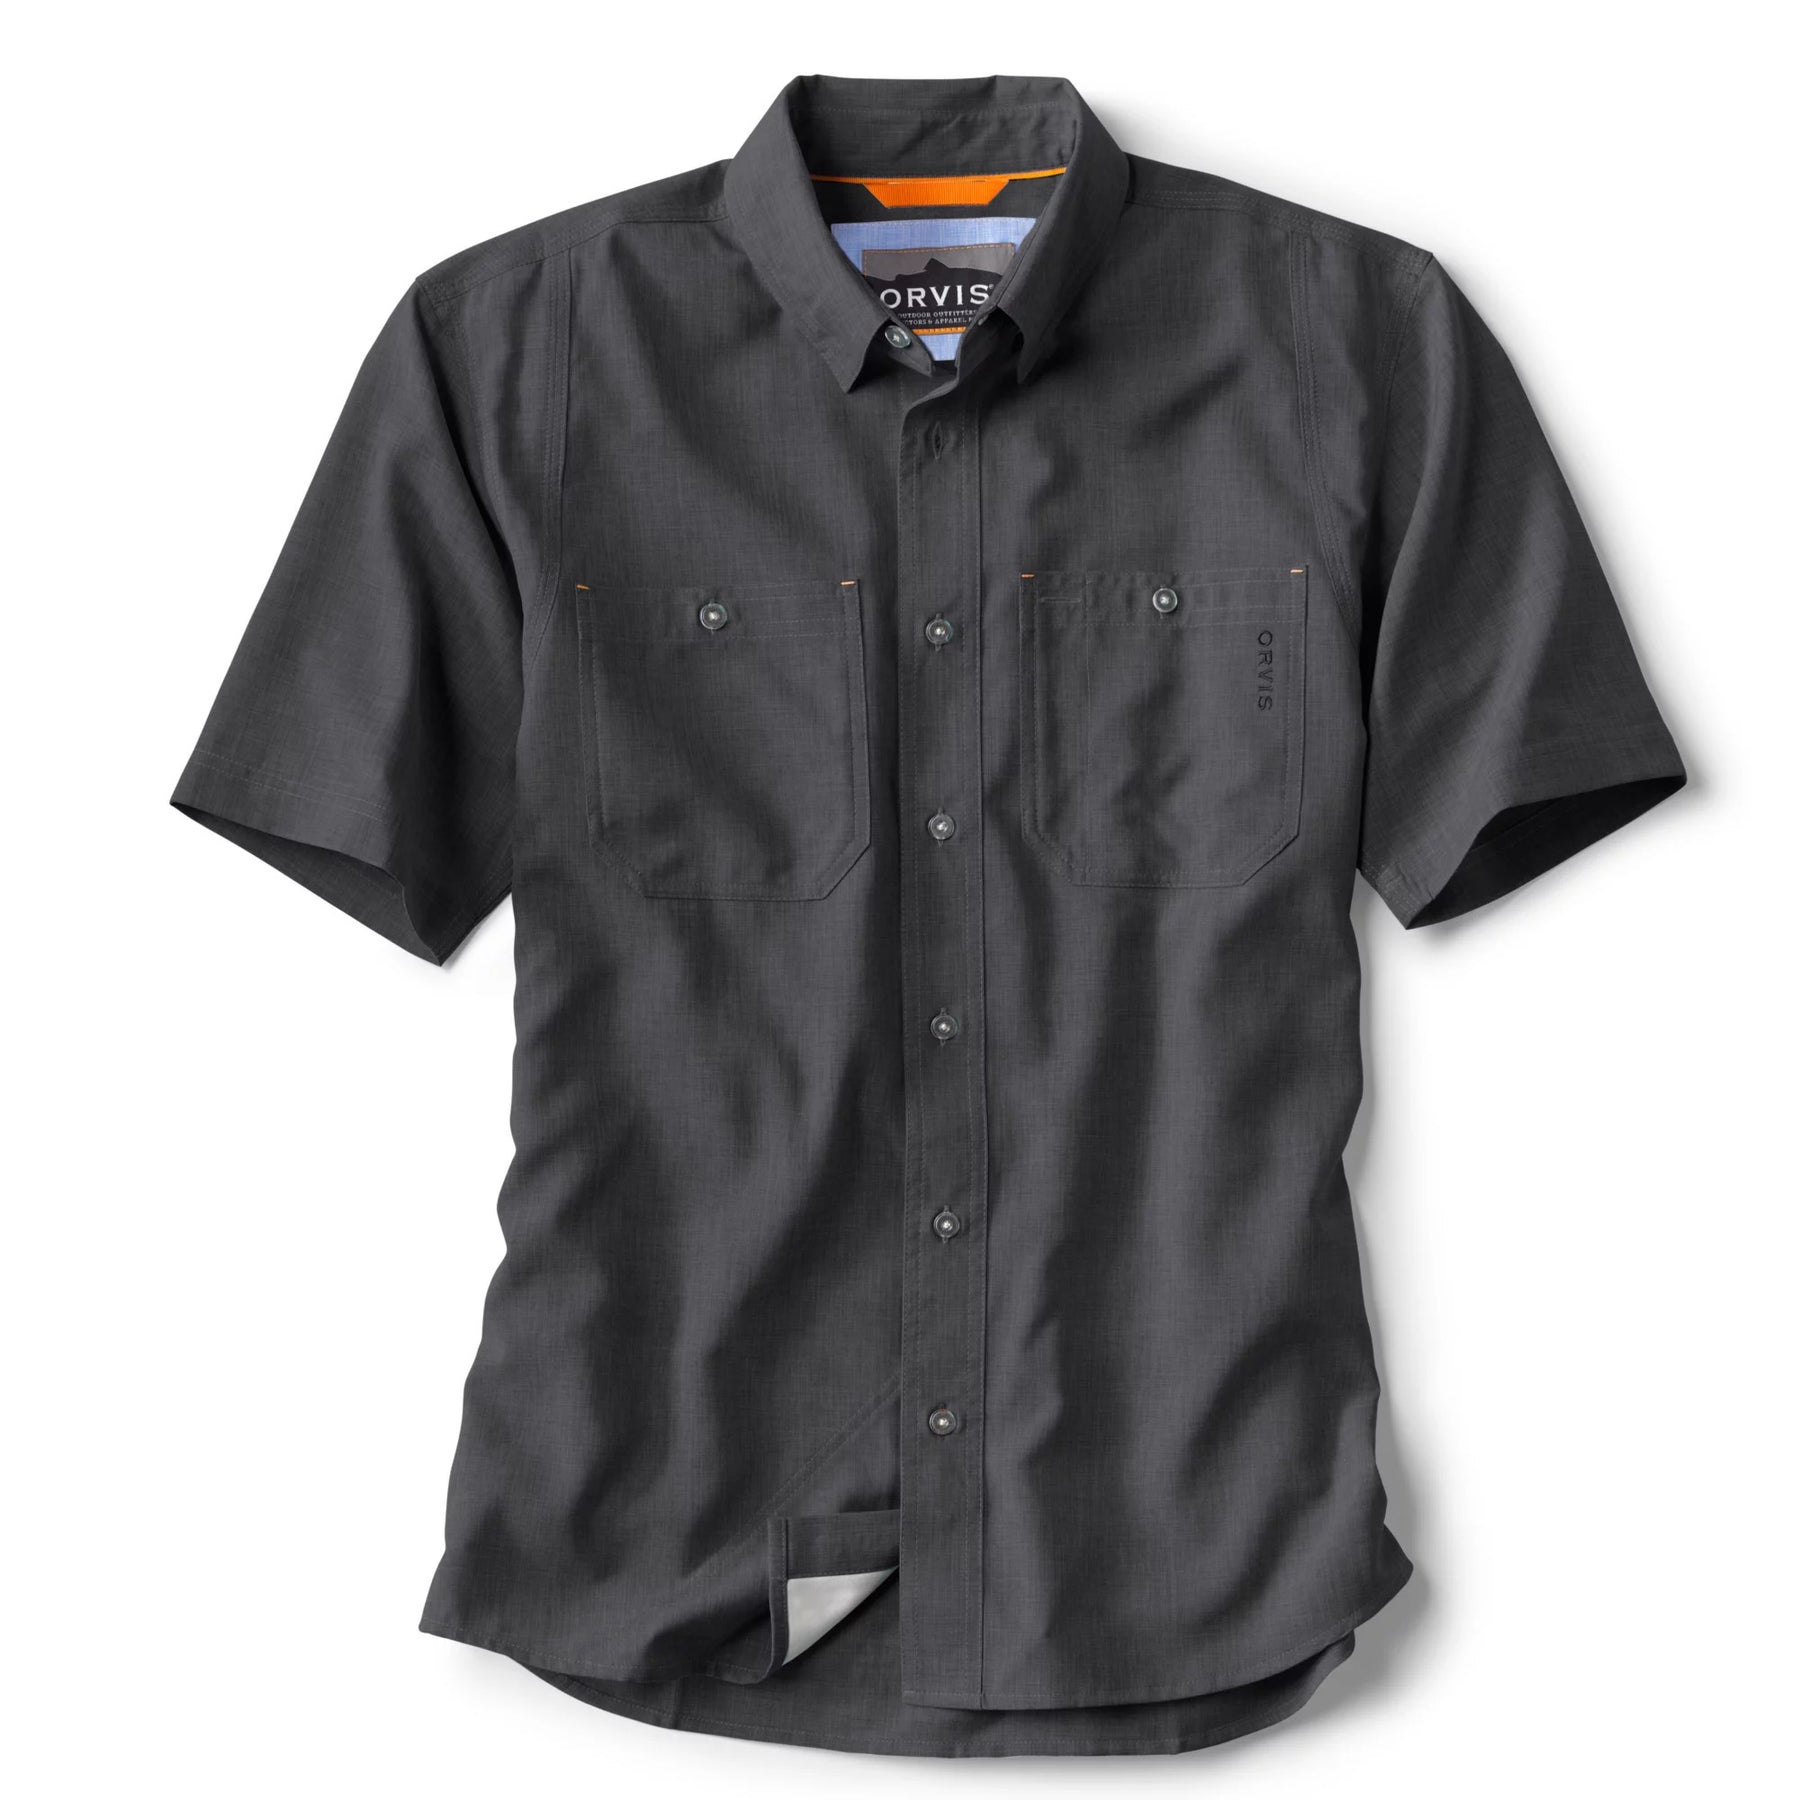 Orvis Tech Chambray Short Sleeved Work Shirt | Kevin's Catalog – Kevin ...